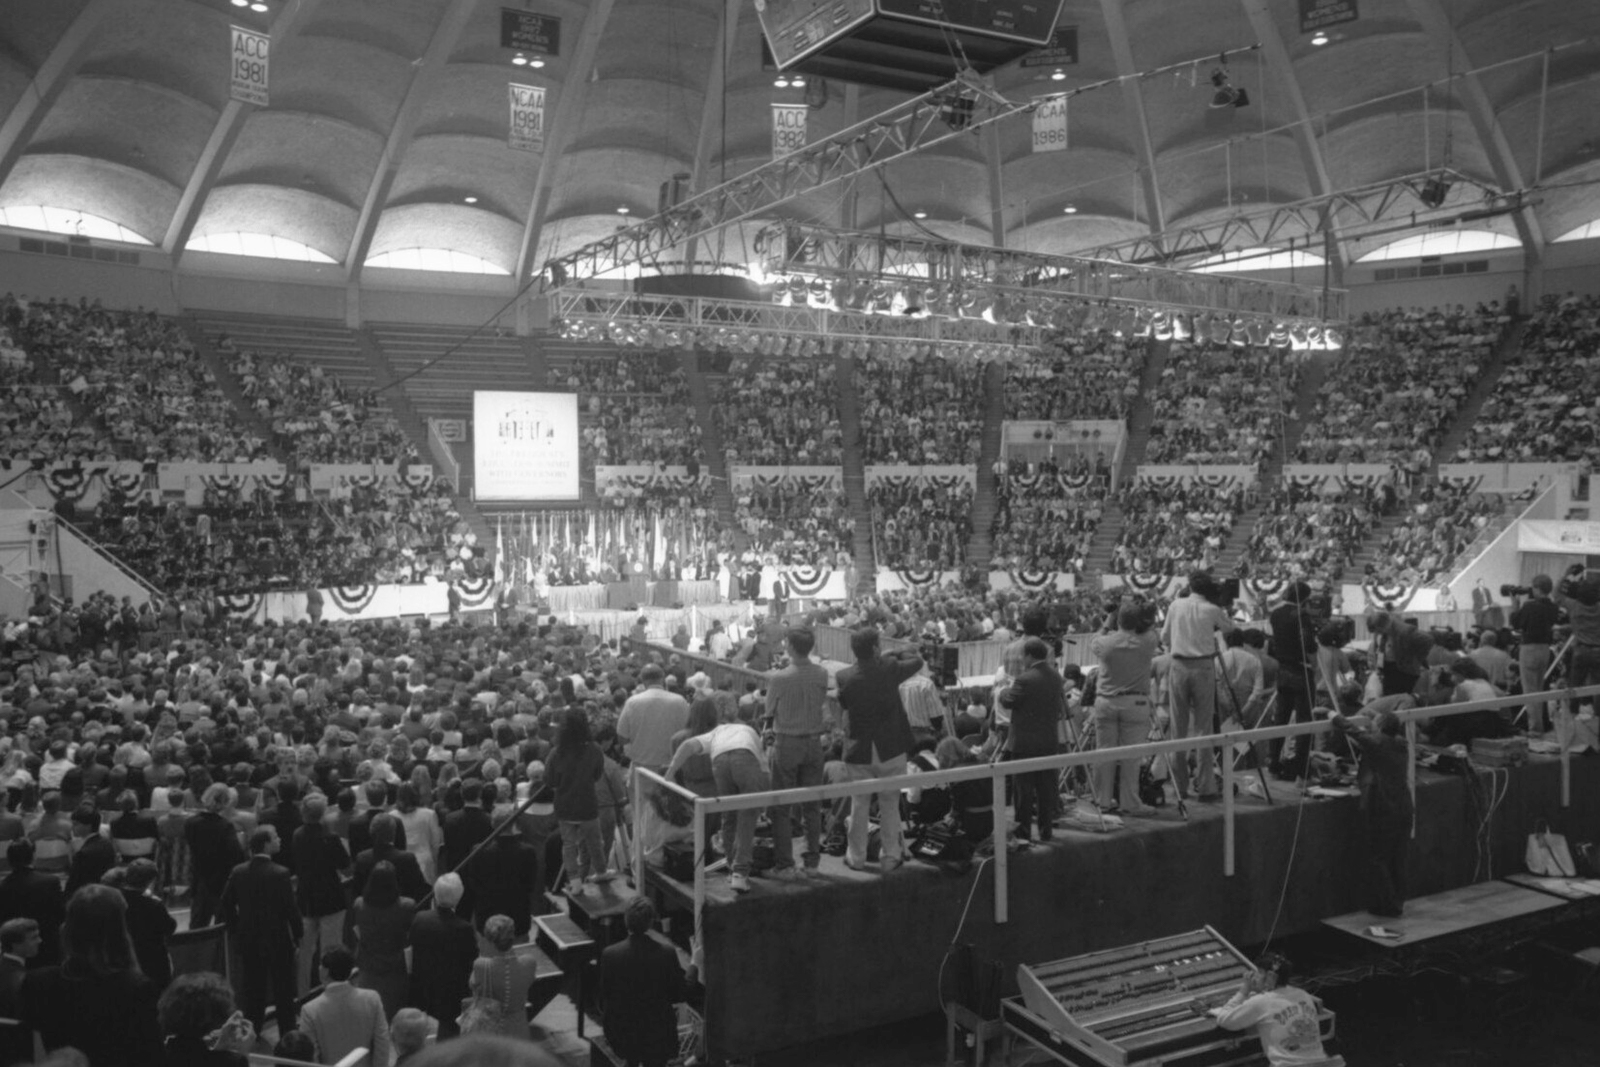 Black and White image of a full convention